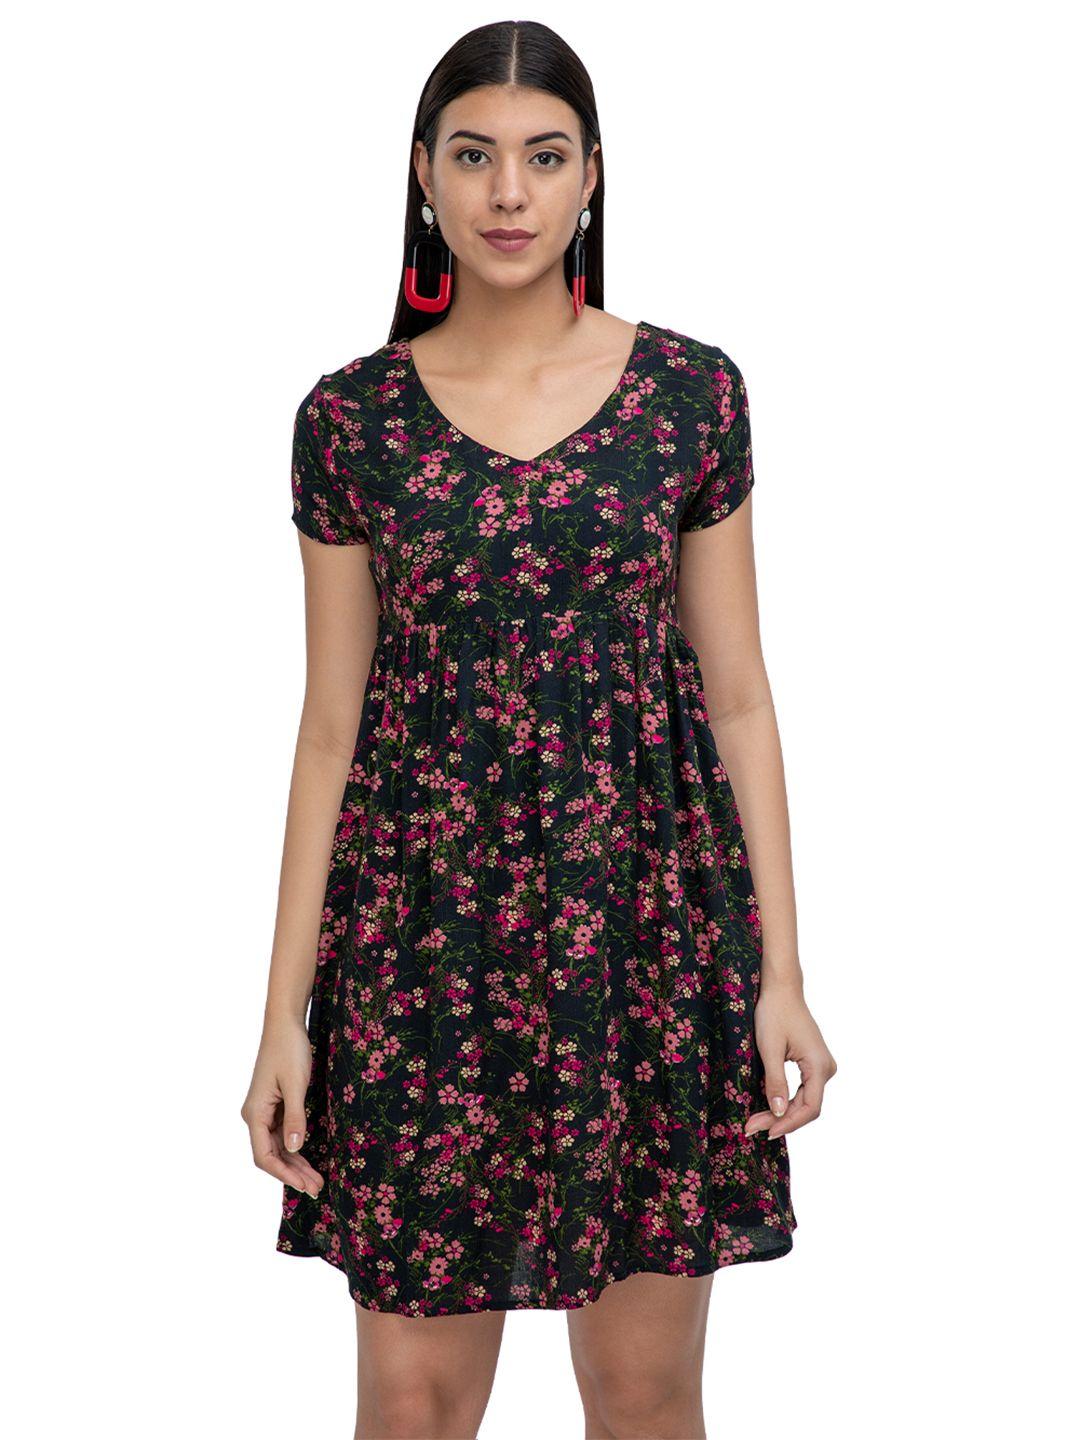 athah black & red floral dress